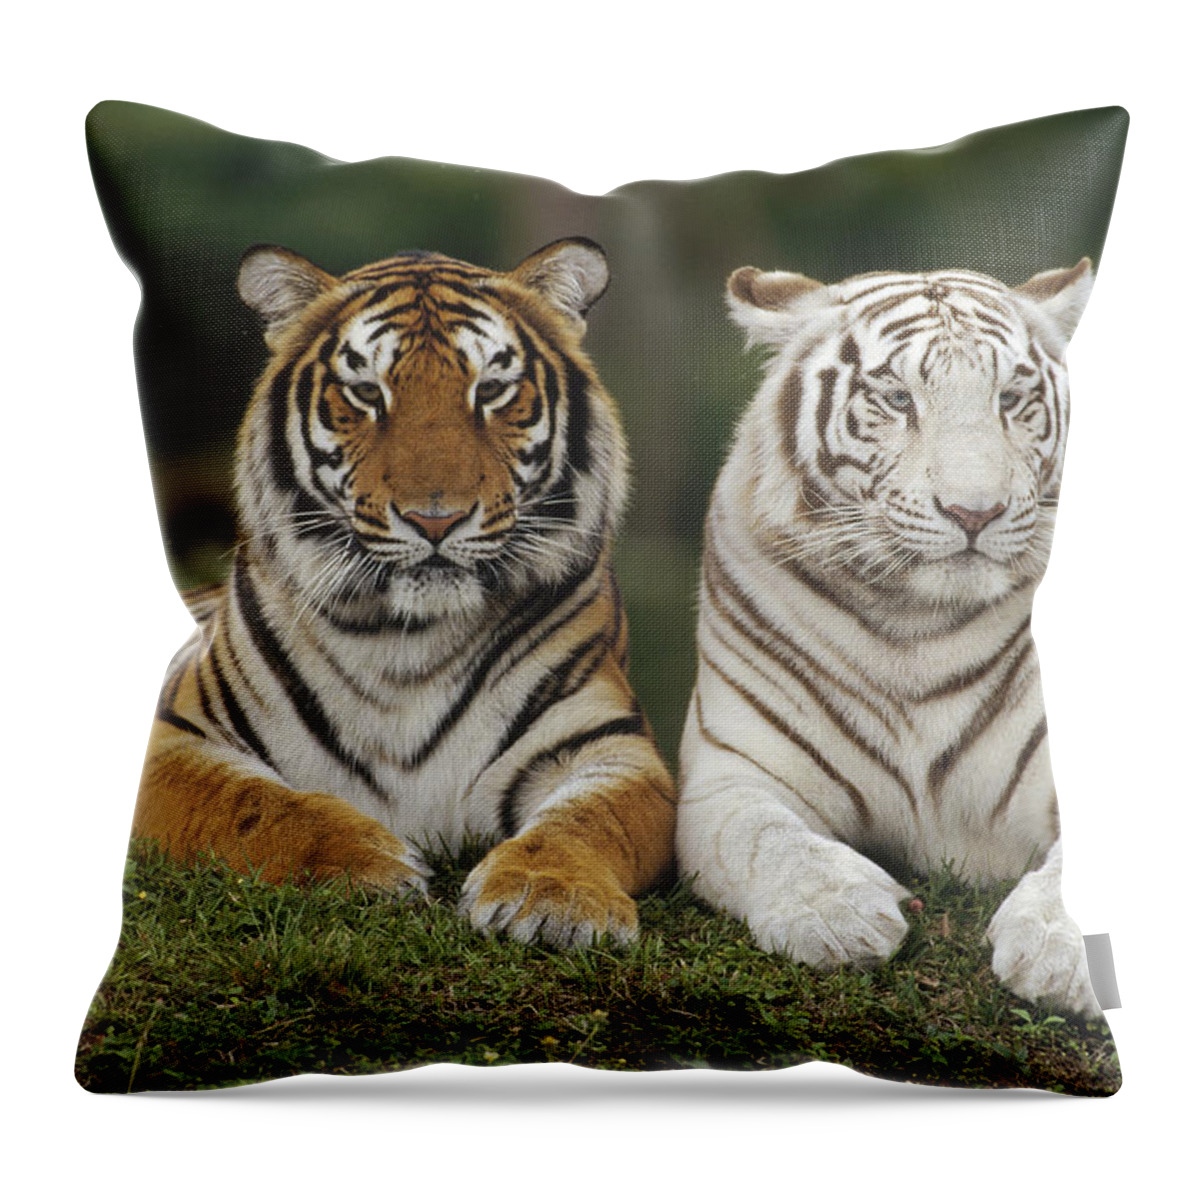 00761896 Throw Pillow featuring the photograph Bengal Tiger Team by Konrad Wothe